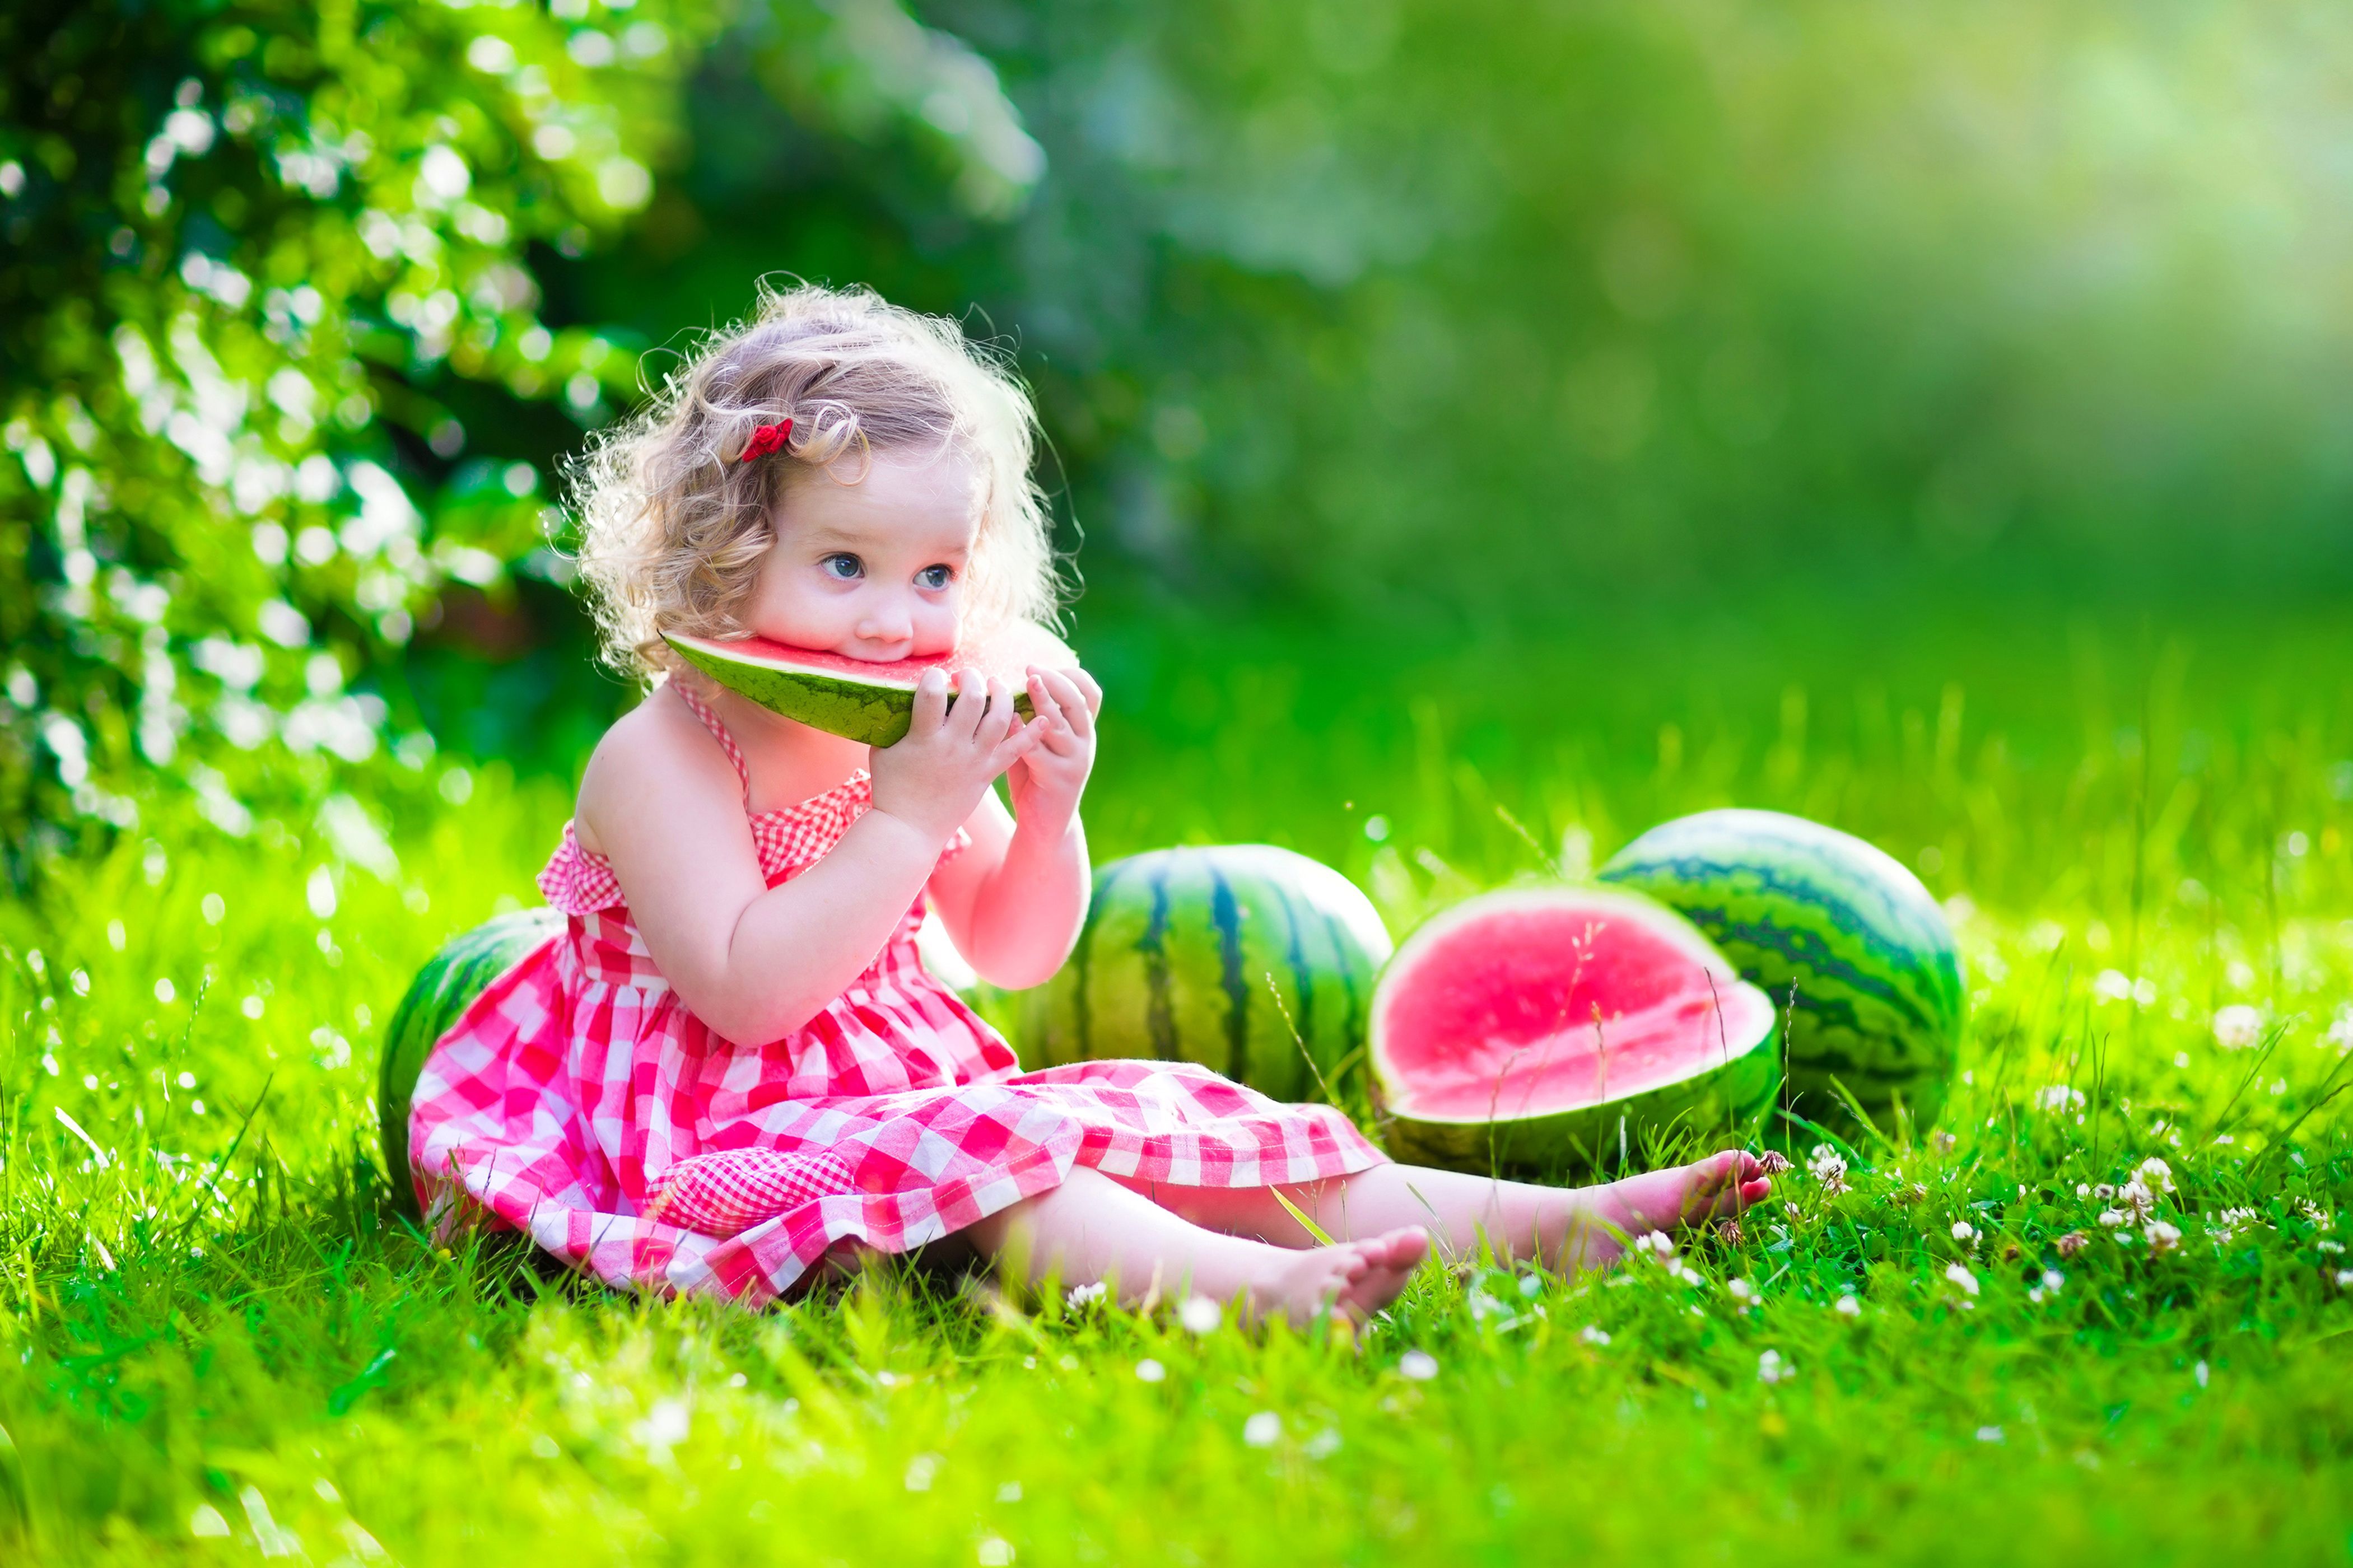 Download wallpaper summer, the sun, glade, child, watermelon, dress, girl, summer, happy, dress, beautiful, pretty, child, baby, little girl, watermelon, section mood in resolution 4201x2800